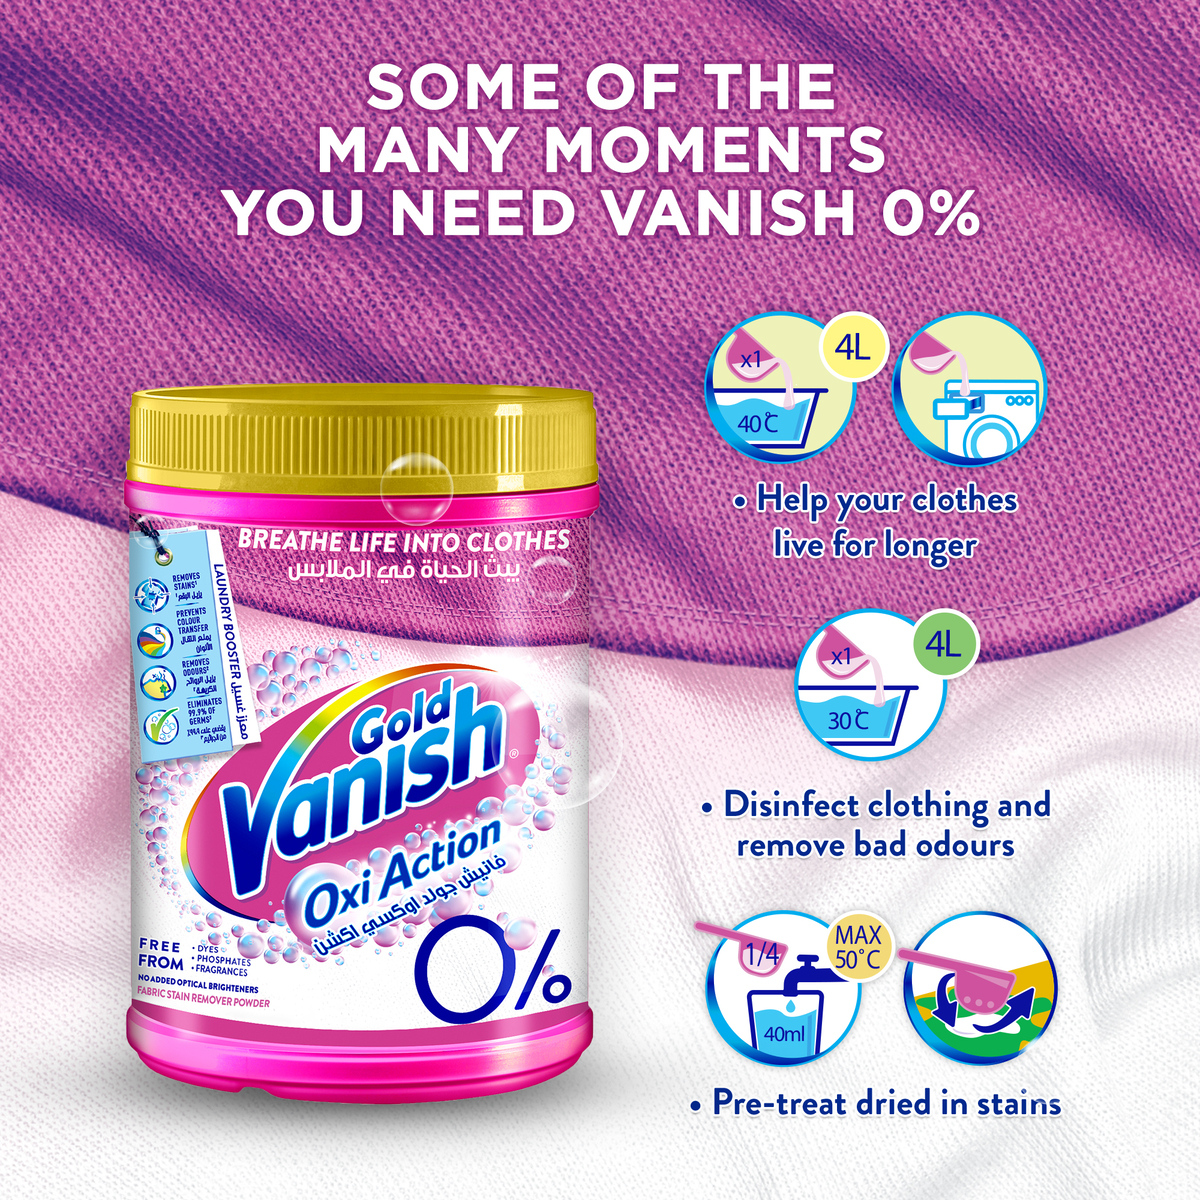 Vanish Gold Oxi Action Fabric Stain Remover Powder 1 kg Online at